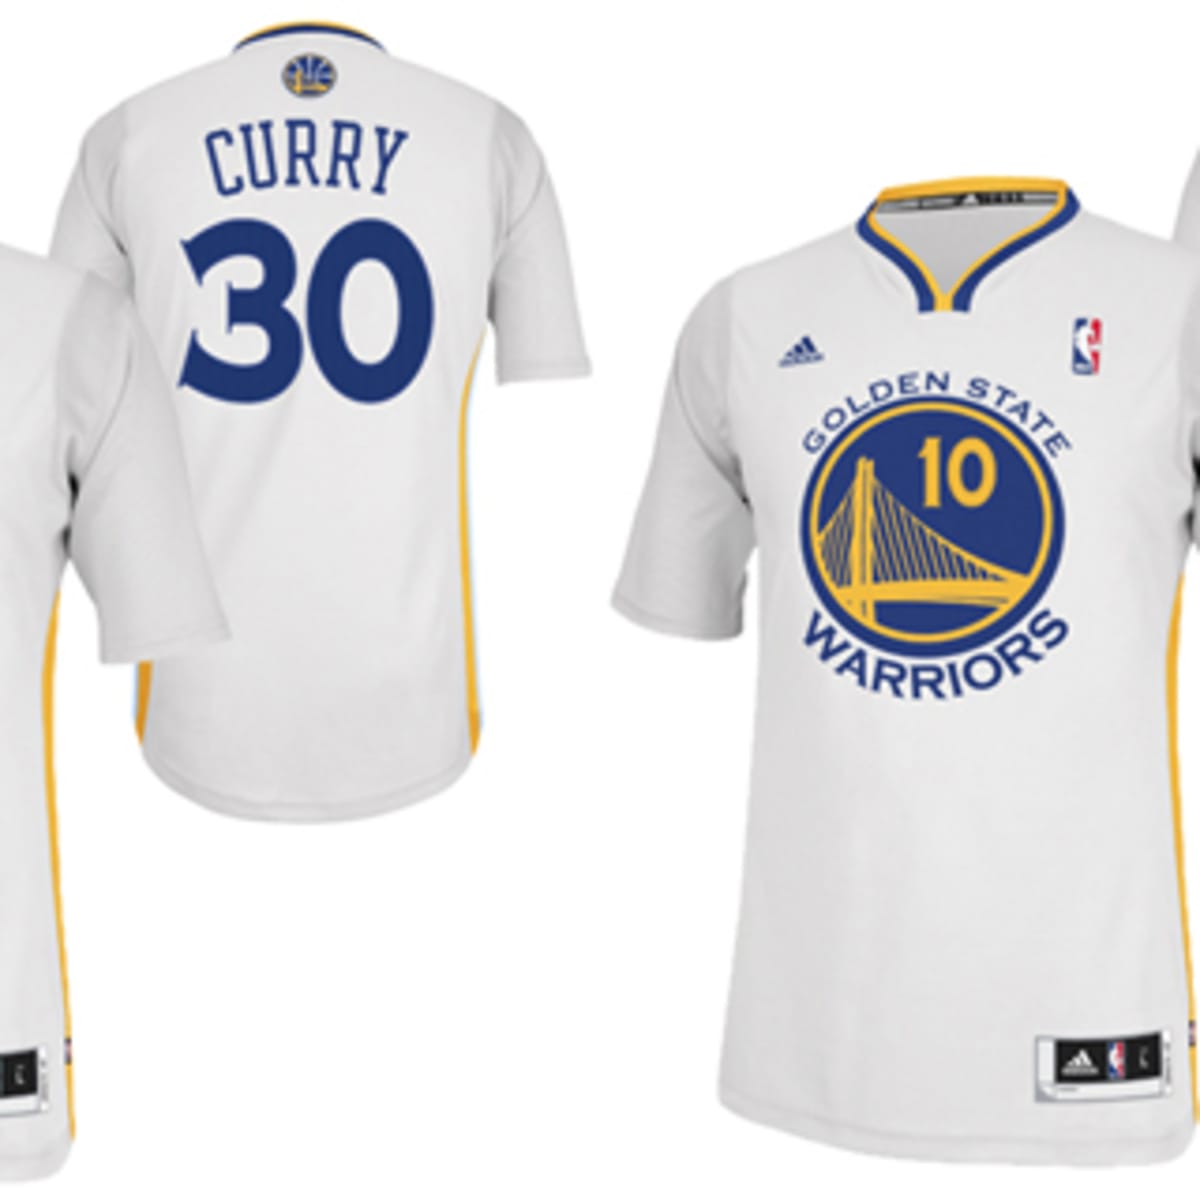 Golden State Warriors' new uniforms, with sleeves